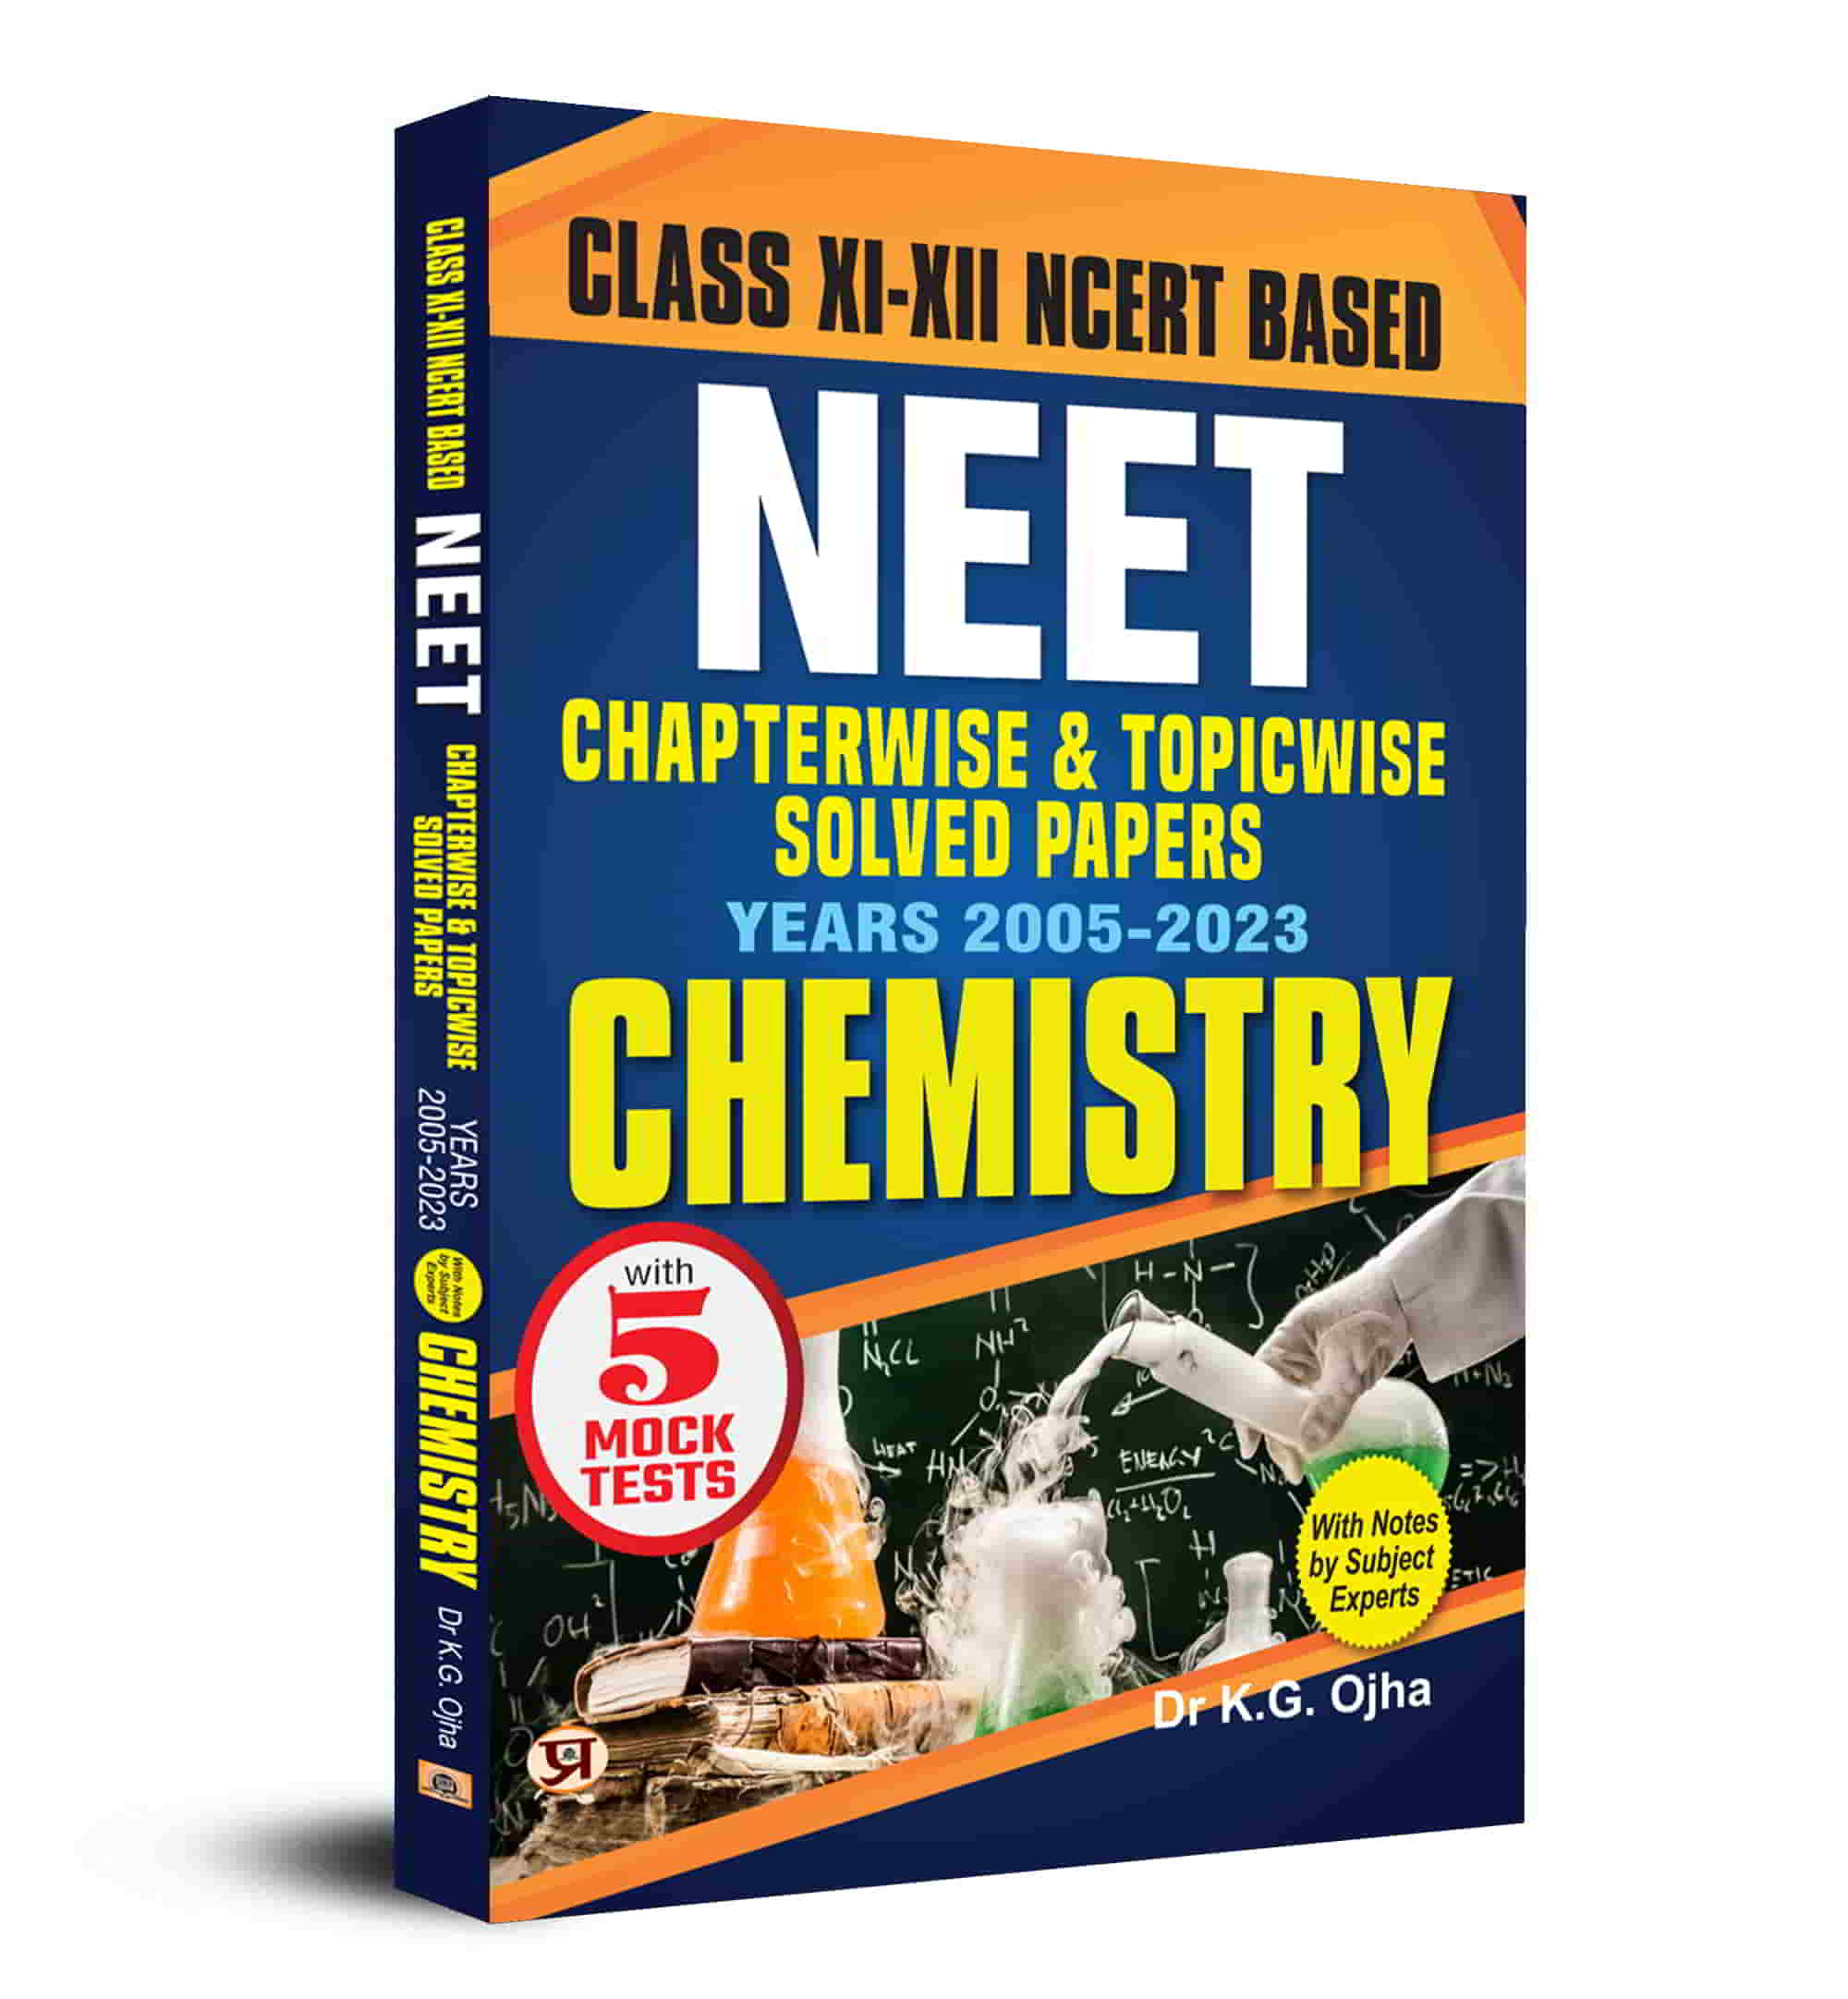 Objective NCERT Based Chapterwise Topicwise Solutions For 11th And 12th Class with Solved Papers (2005 -2023) with Notes for NEET-AIIMS Exam 2024 - Chemistry